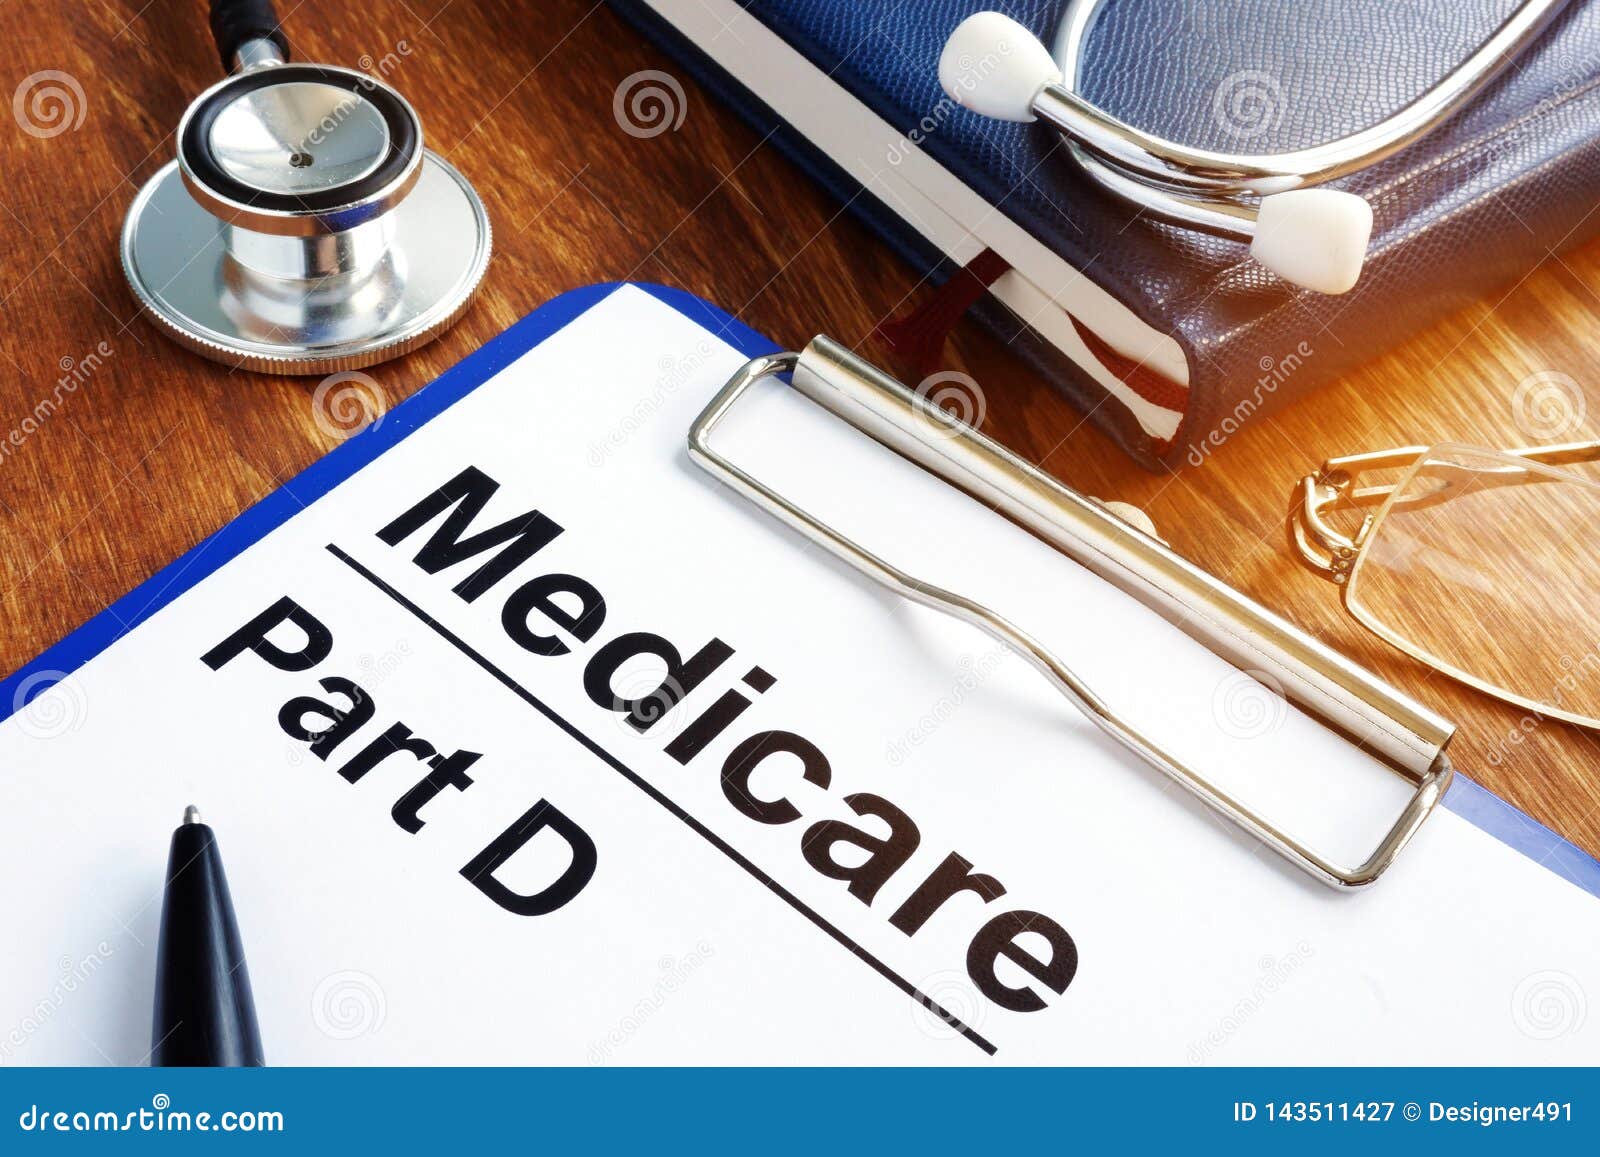 medicare part d documents with clipboard